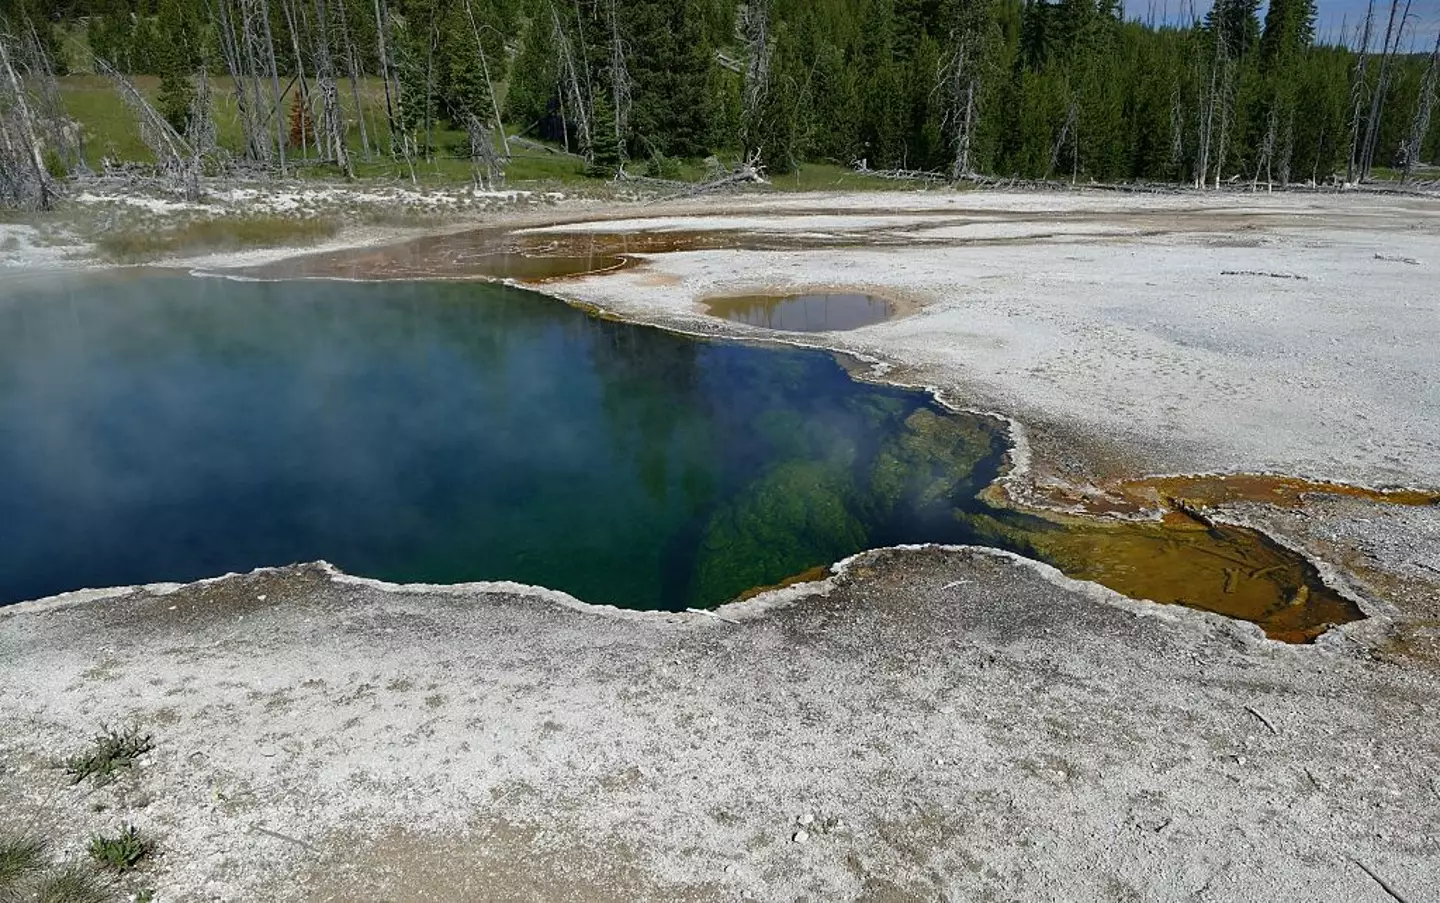 Researchers looked at conditions resembling hot springs.